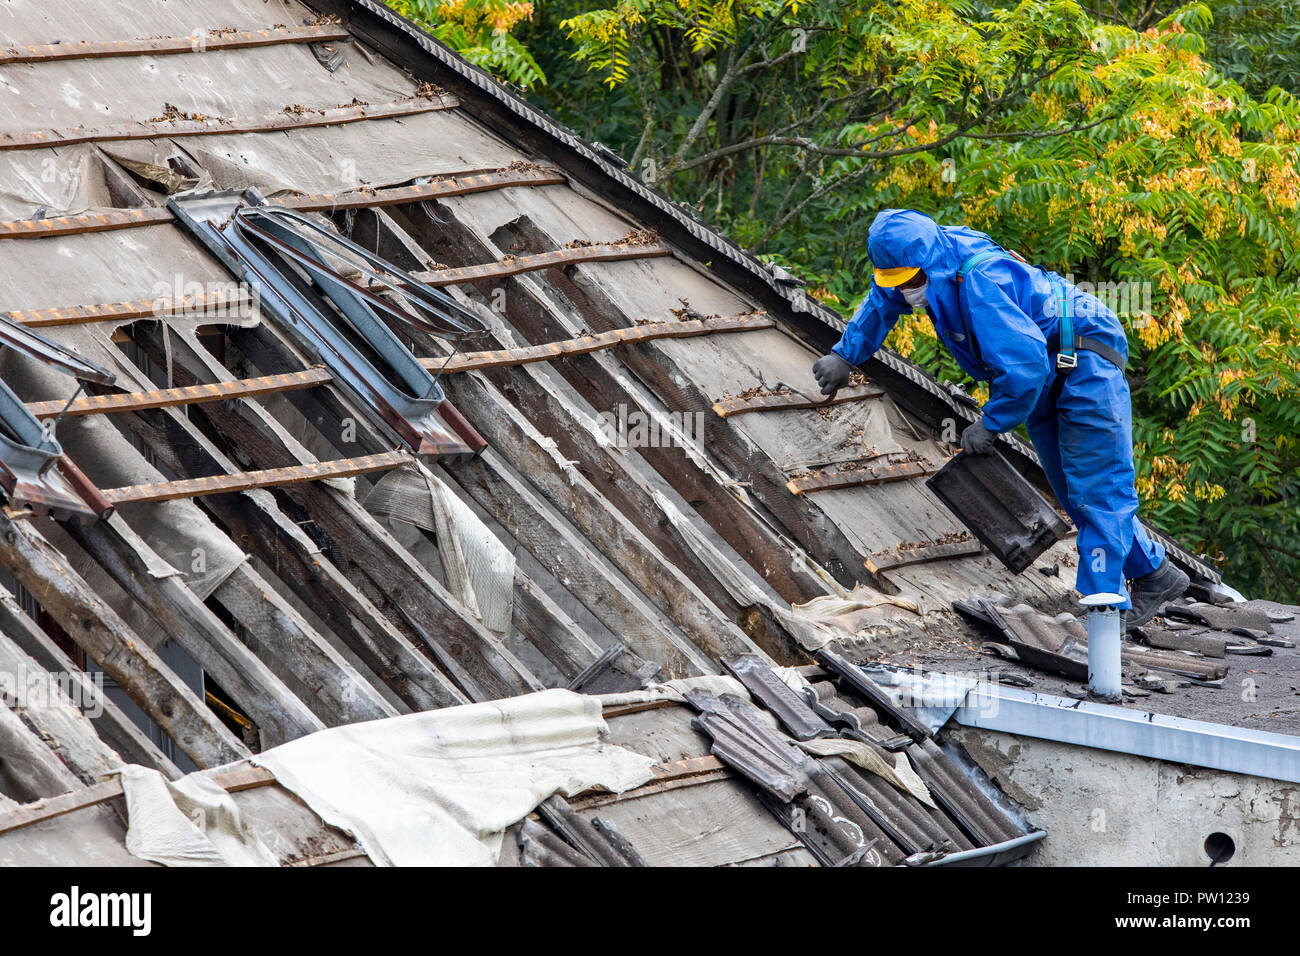 Demolition of an older dwelling house, here new rentable flats are develop, workers in the protective suit disassembled the roof, separates different  Stock Photo